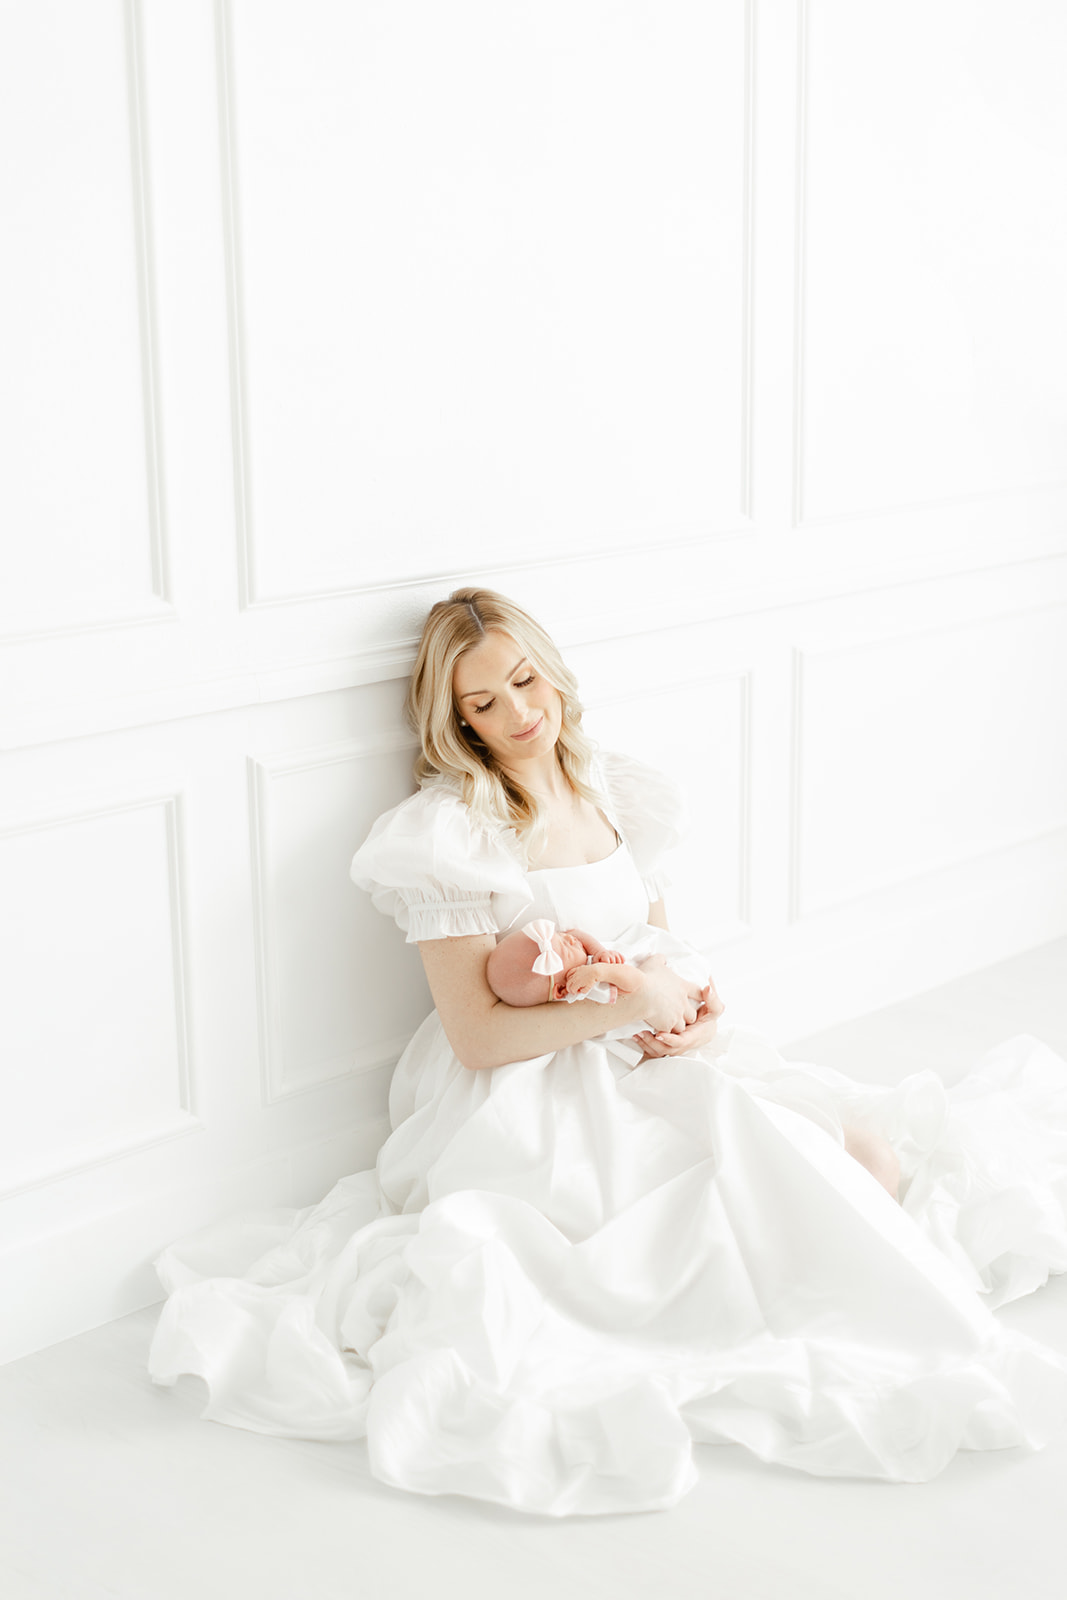 A happy mother in a white dress sits on the floor of a studio smiling down at her sleeping newborn baby in her arms thanks to Dallas Fertility Clinic